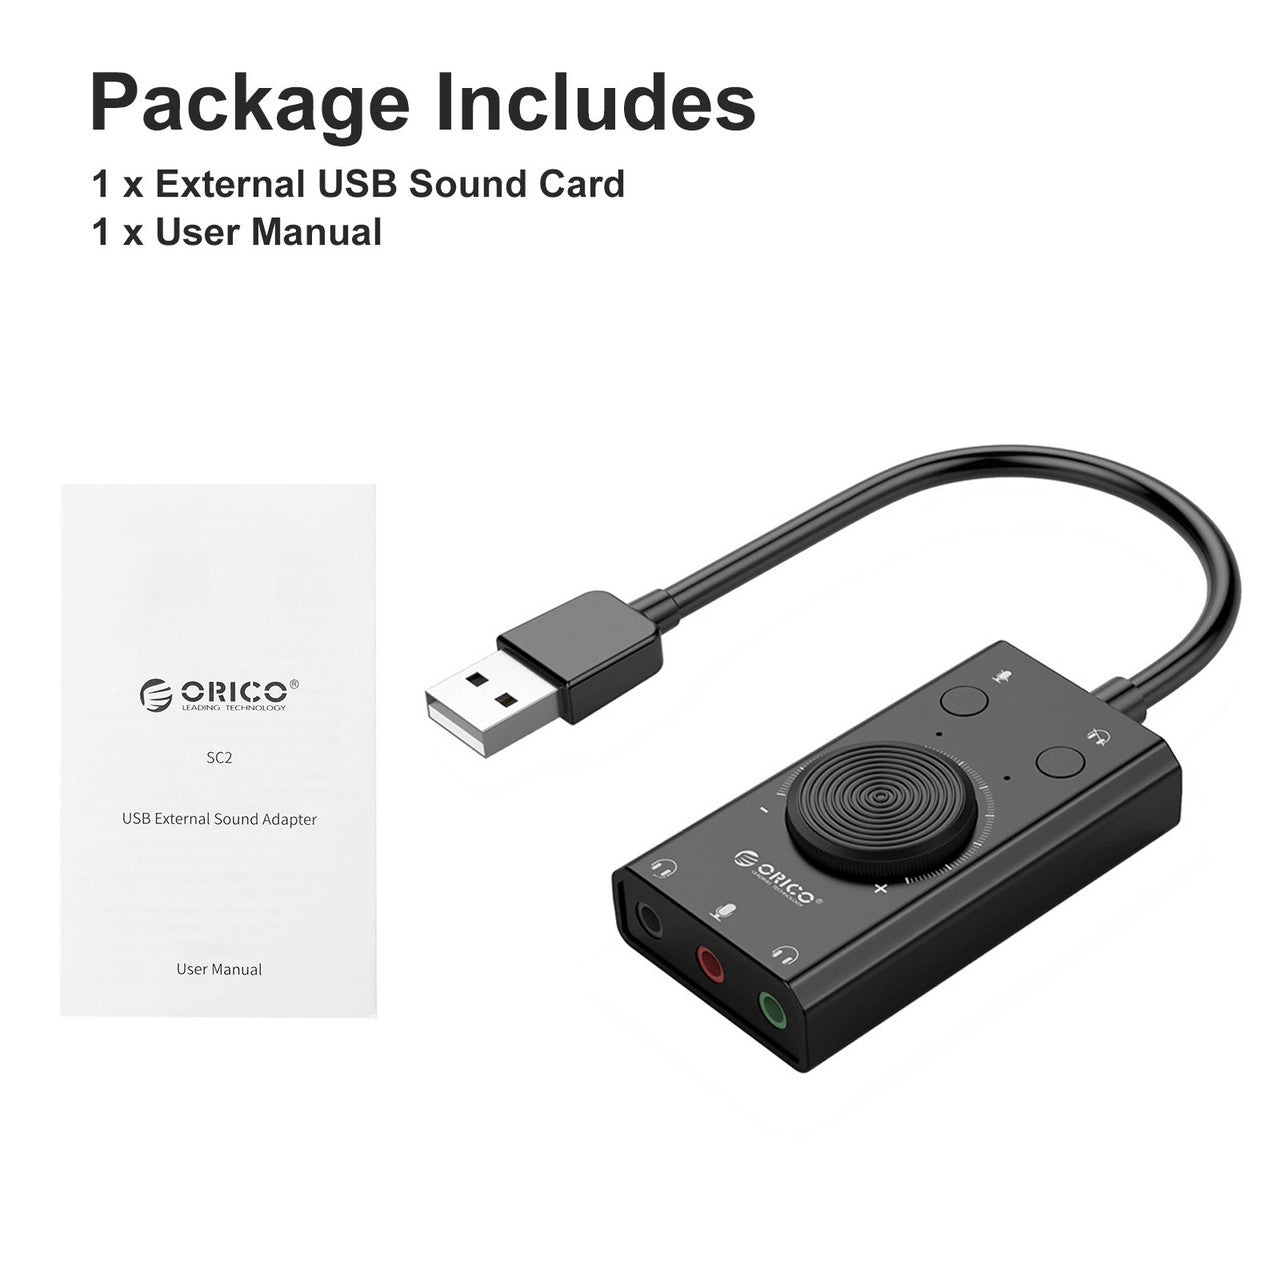 7.1 USB Sound Card Adapter, External Audio Adapter Stereo Sound Card Converter 3.5mm AUX Microphone Jack Fits for Gaming Headset Earphone PS4 Laptop Desktop Windows Mac OS Linux, Plug and Play